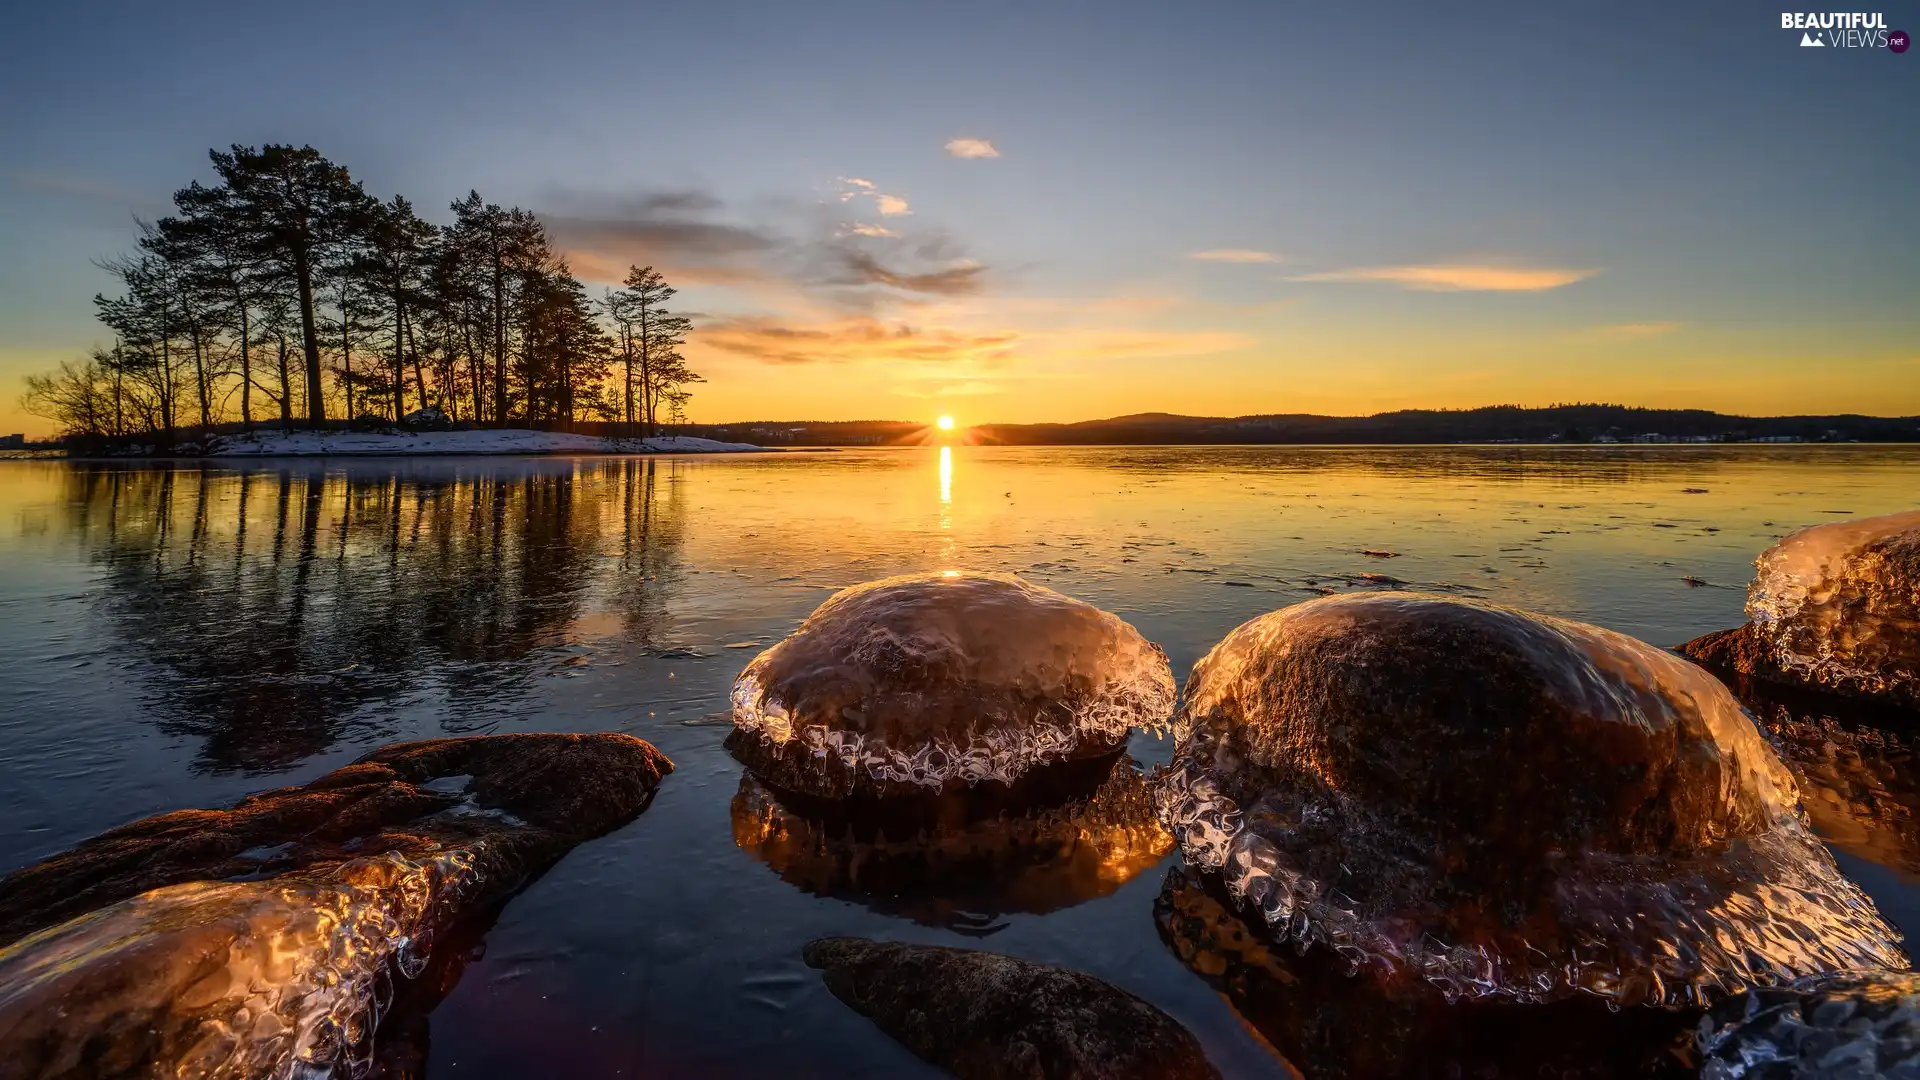 Stones, winter, viewes, Great Sunsets, trees, lake